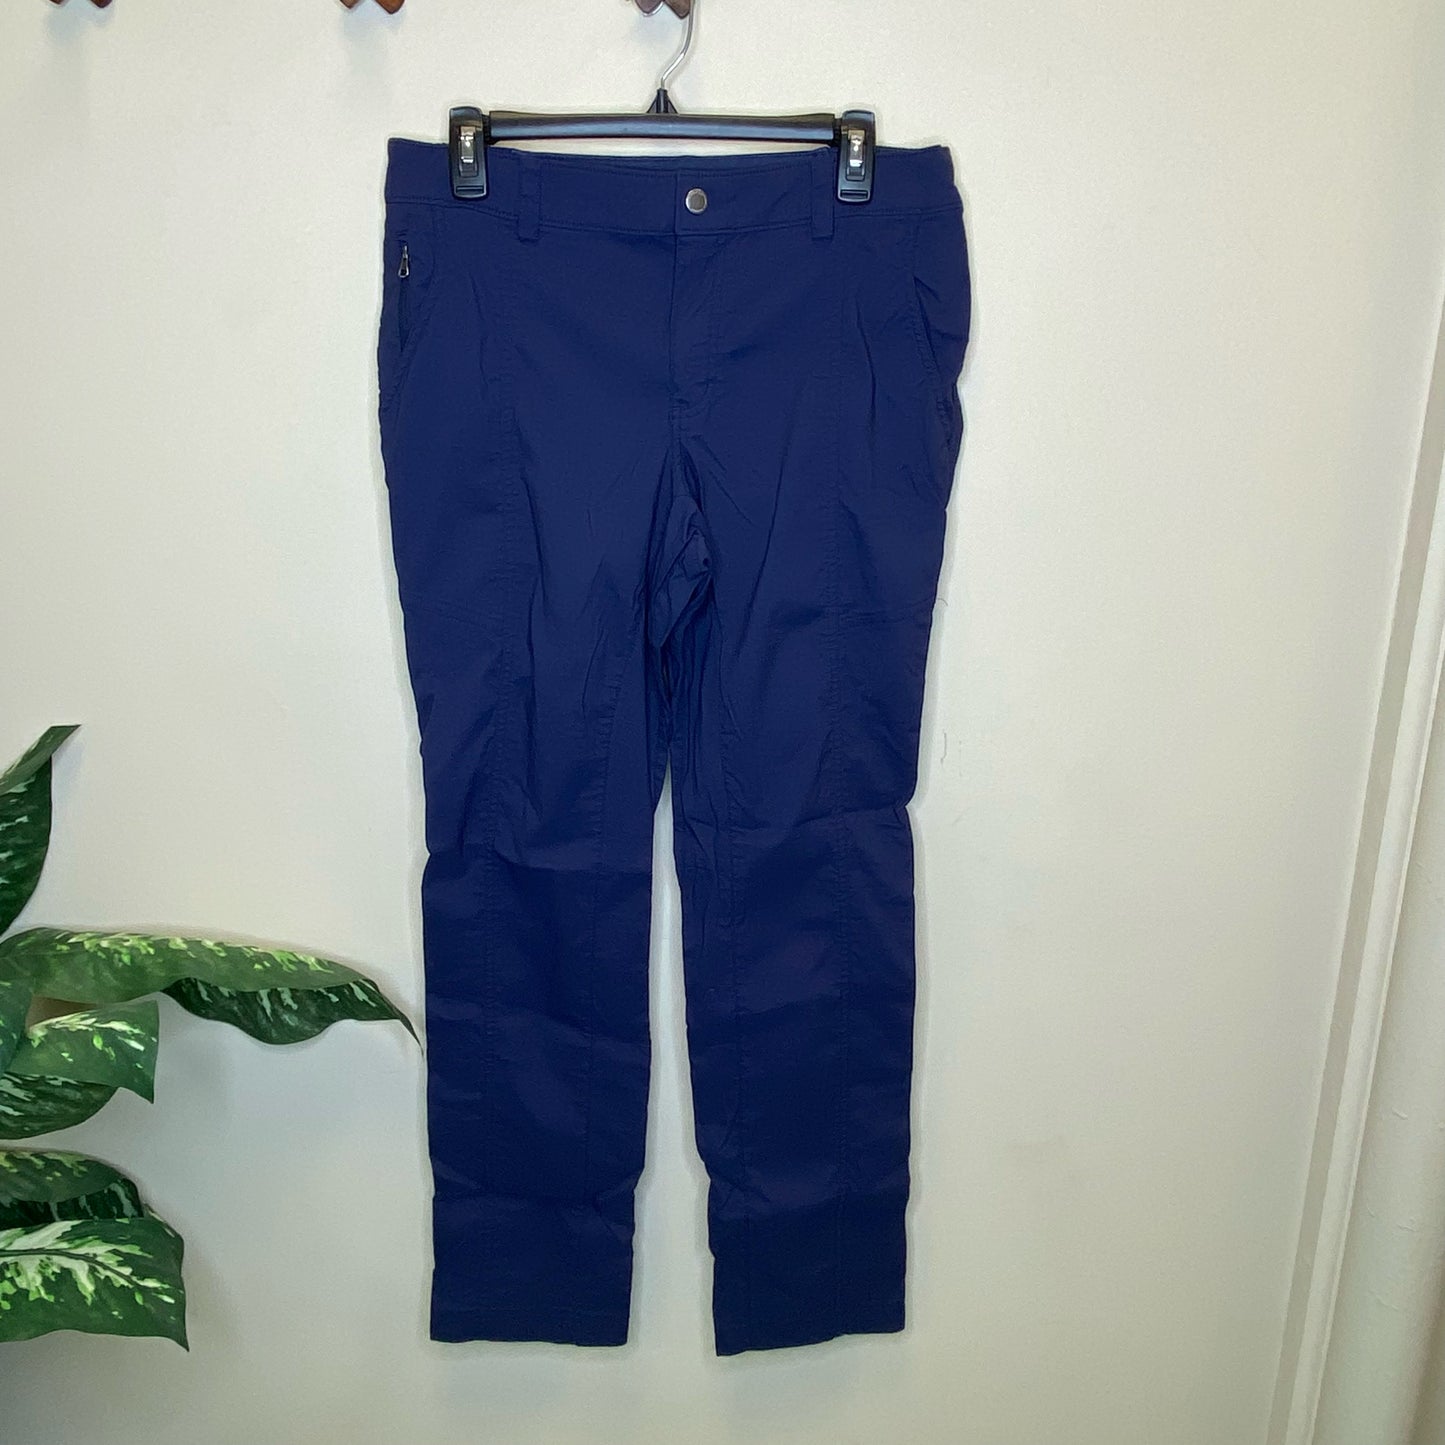 Duluth Trading Co Dry on the Fly Pants - Size 12 X 31